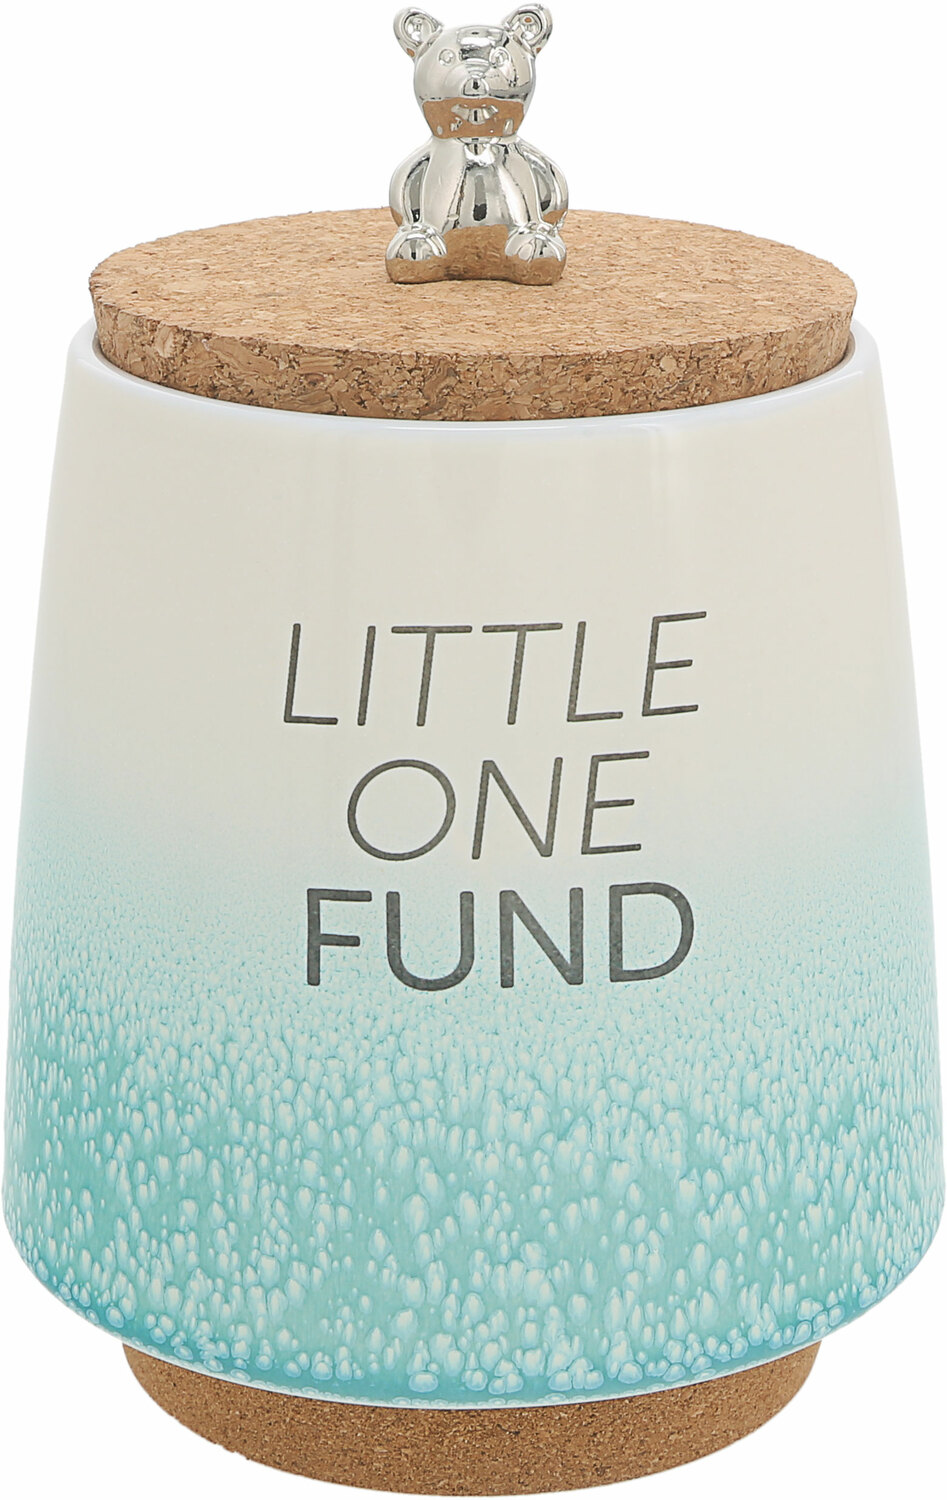 Little One by So Much Fun-d - Little One - 6.5" Ceramic Savings Bank